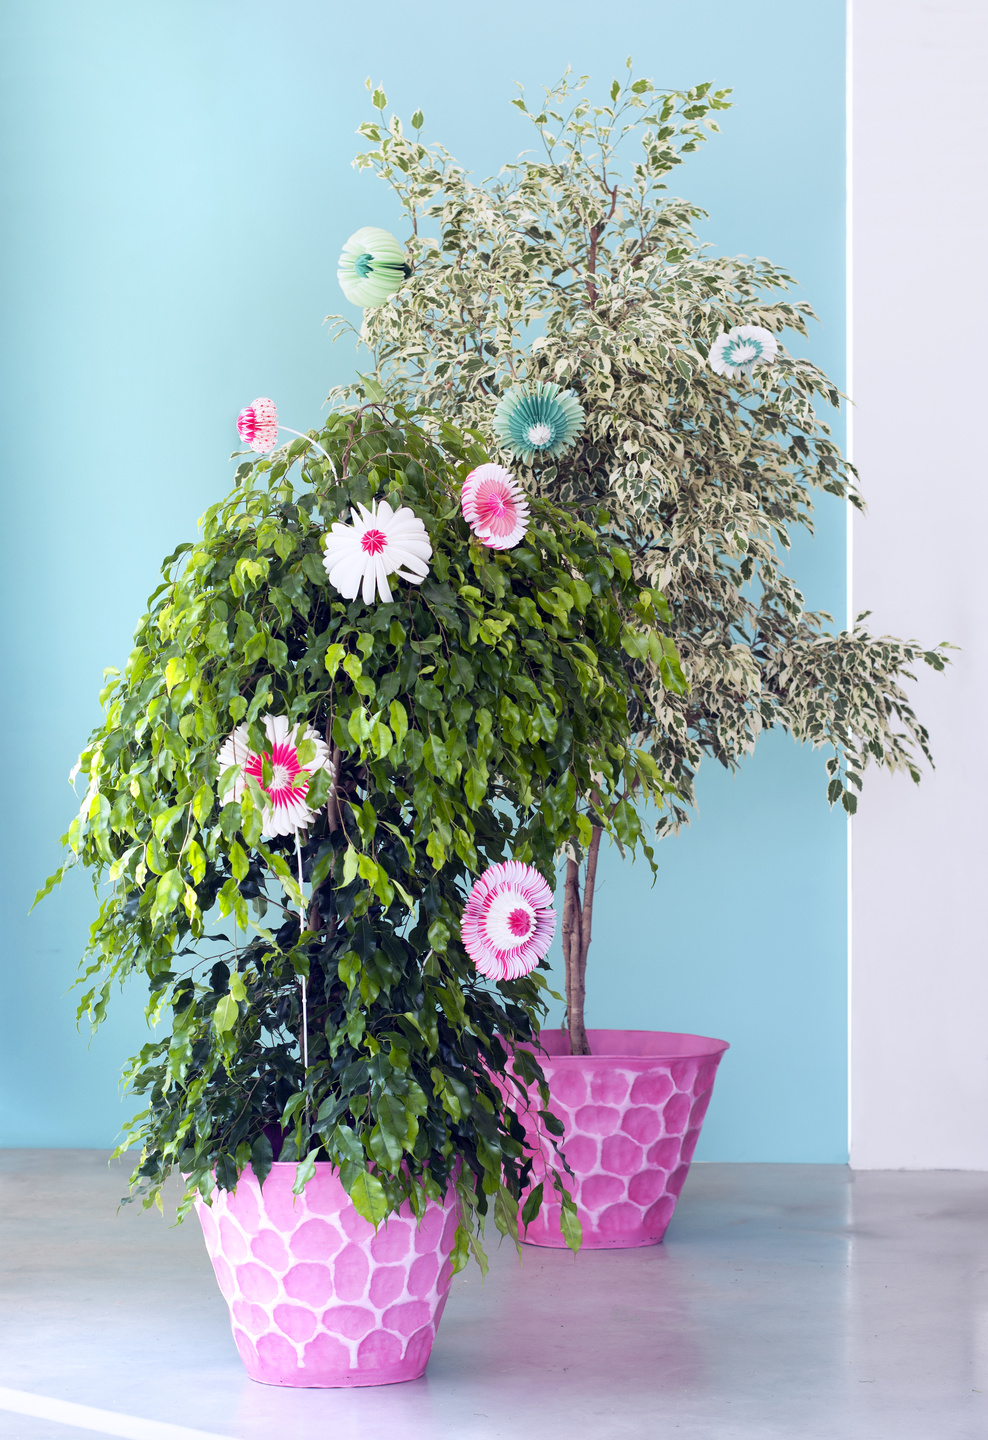 January 2017: Ficus benjamina Houseplant of the Month | Flower Council